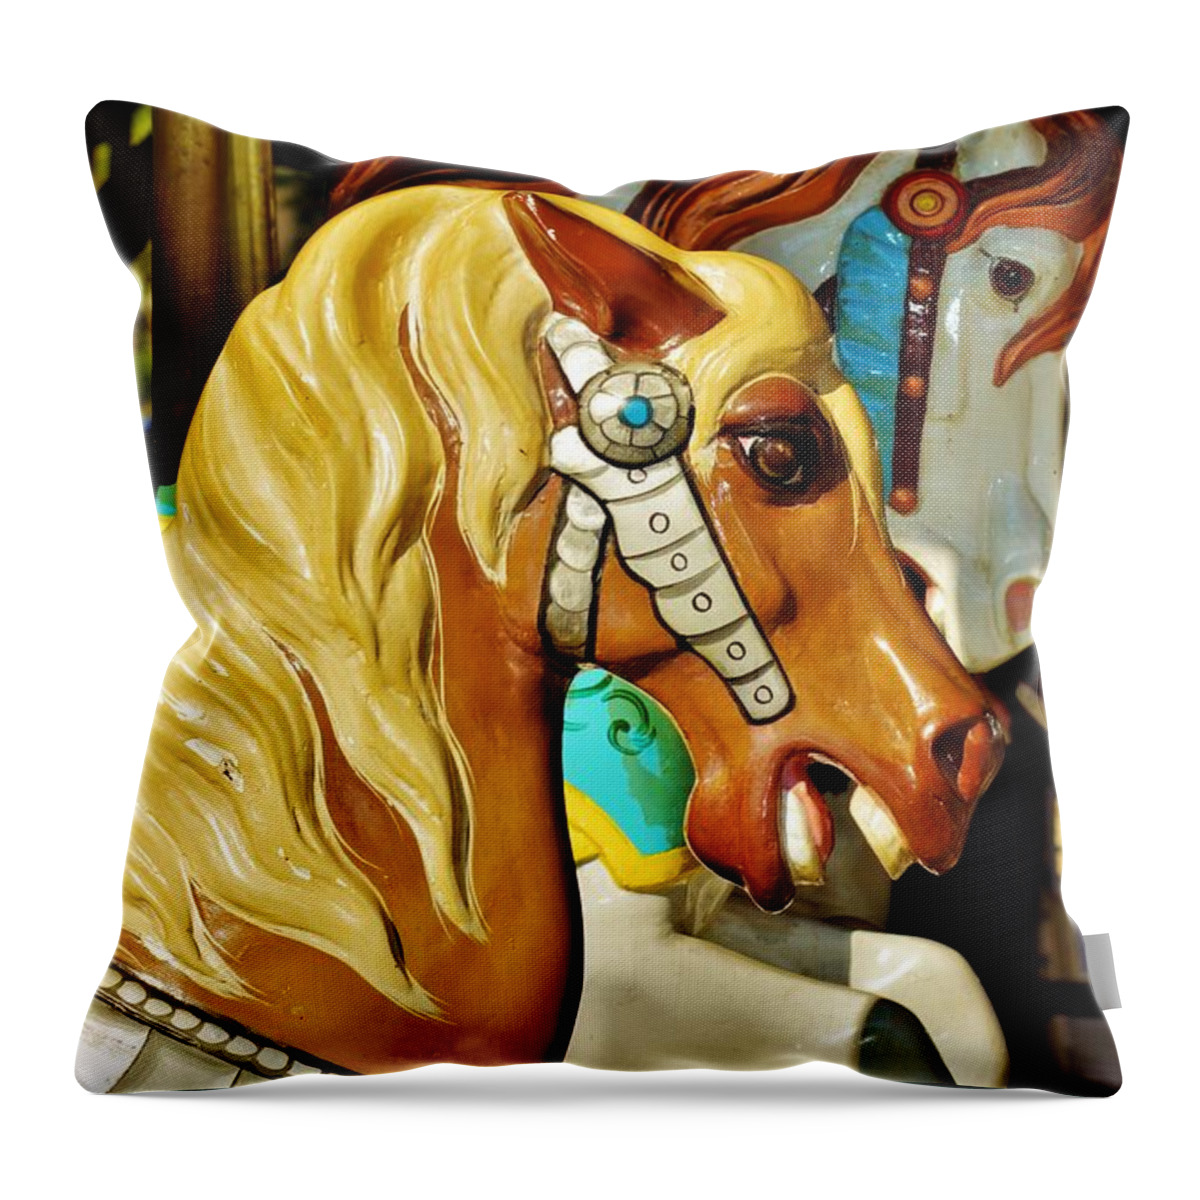 Carousel Horse Throw Pillow featuring the photograph Carousel Horse 3 by Jean Goodwin Brooks